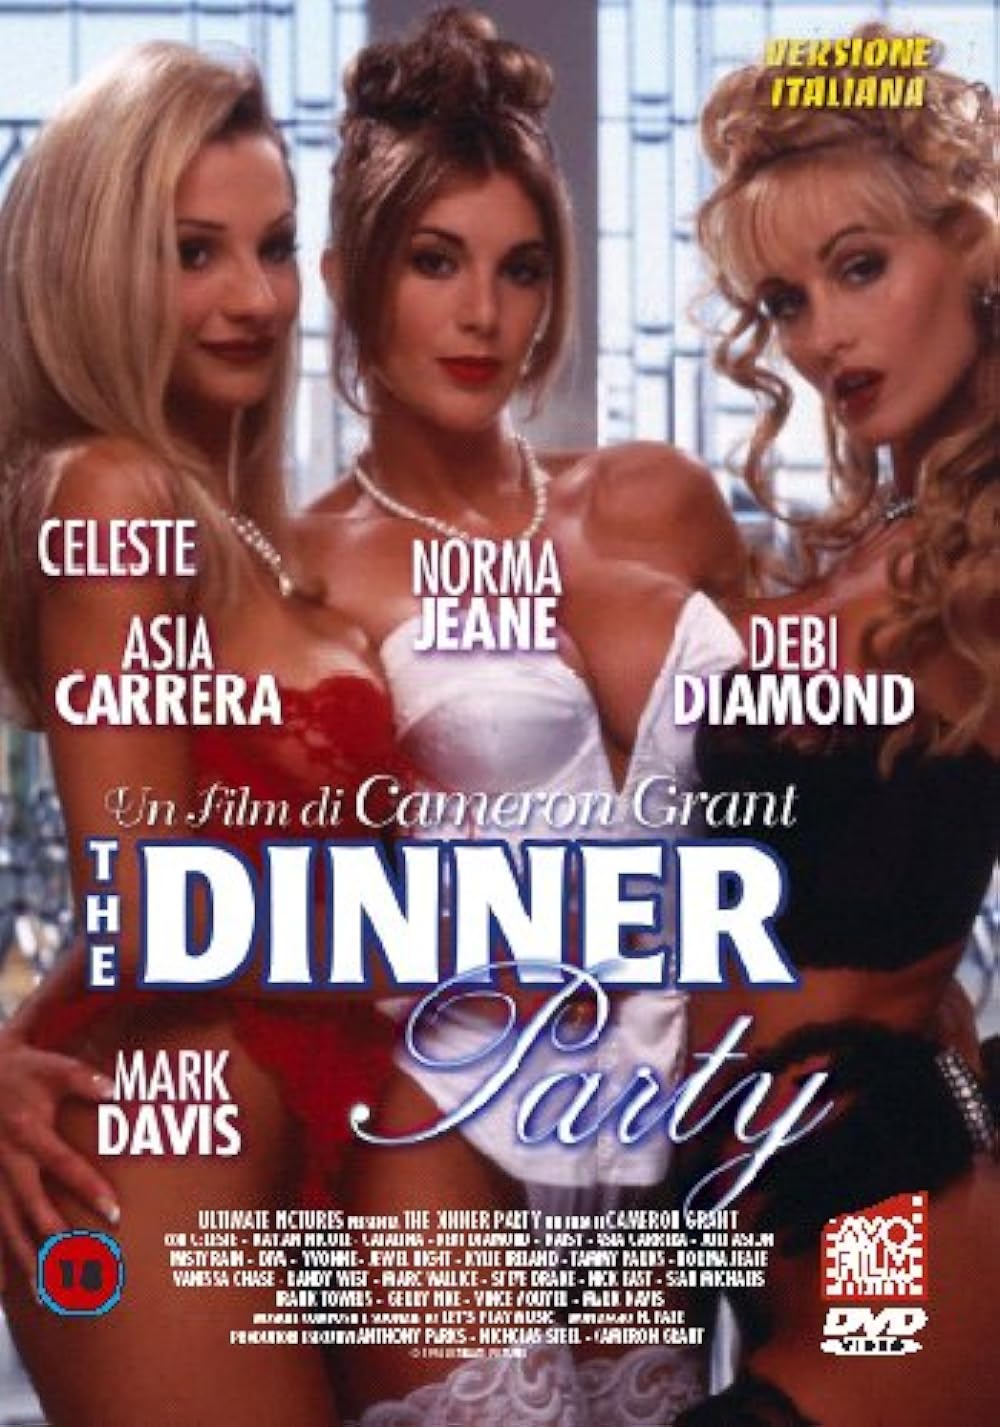 allison currie recommends the dinner party xxx pic